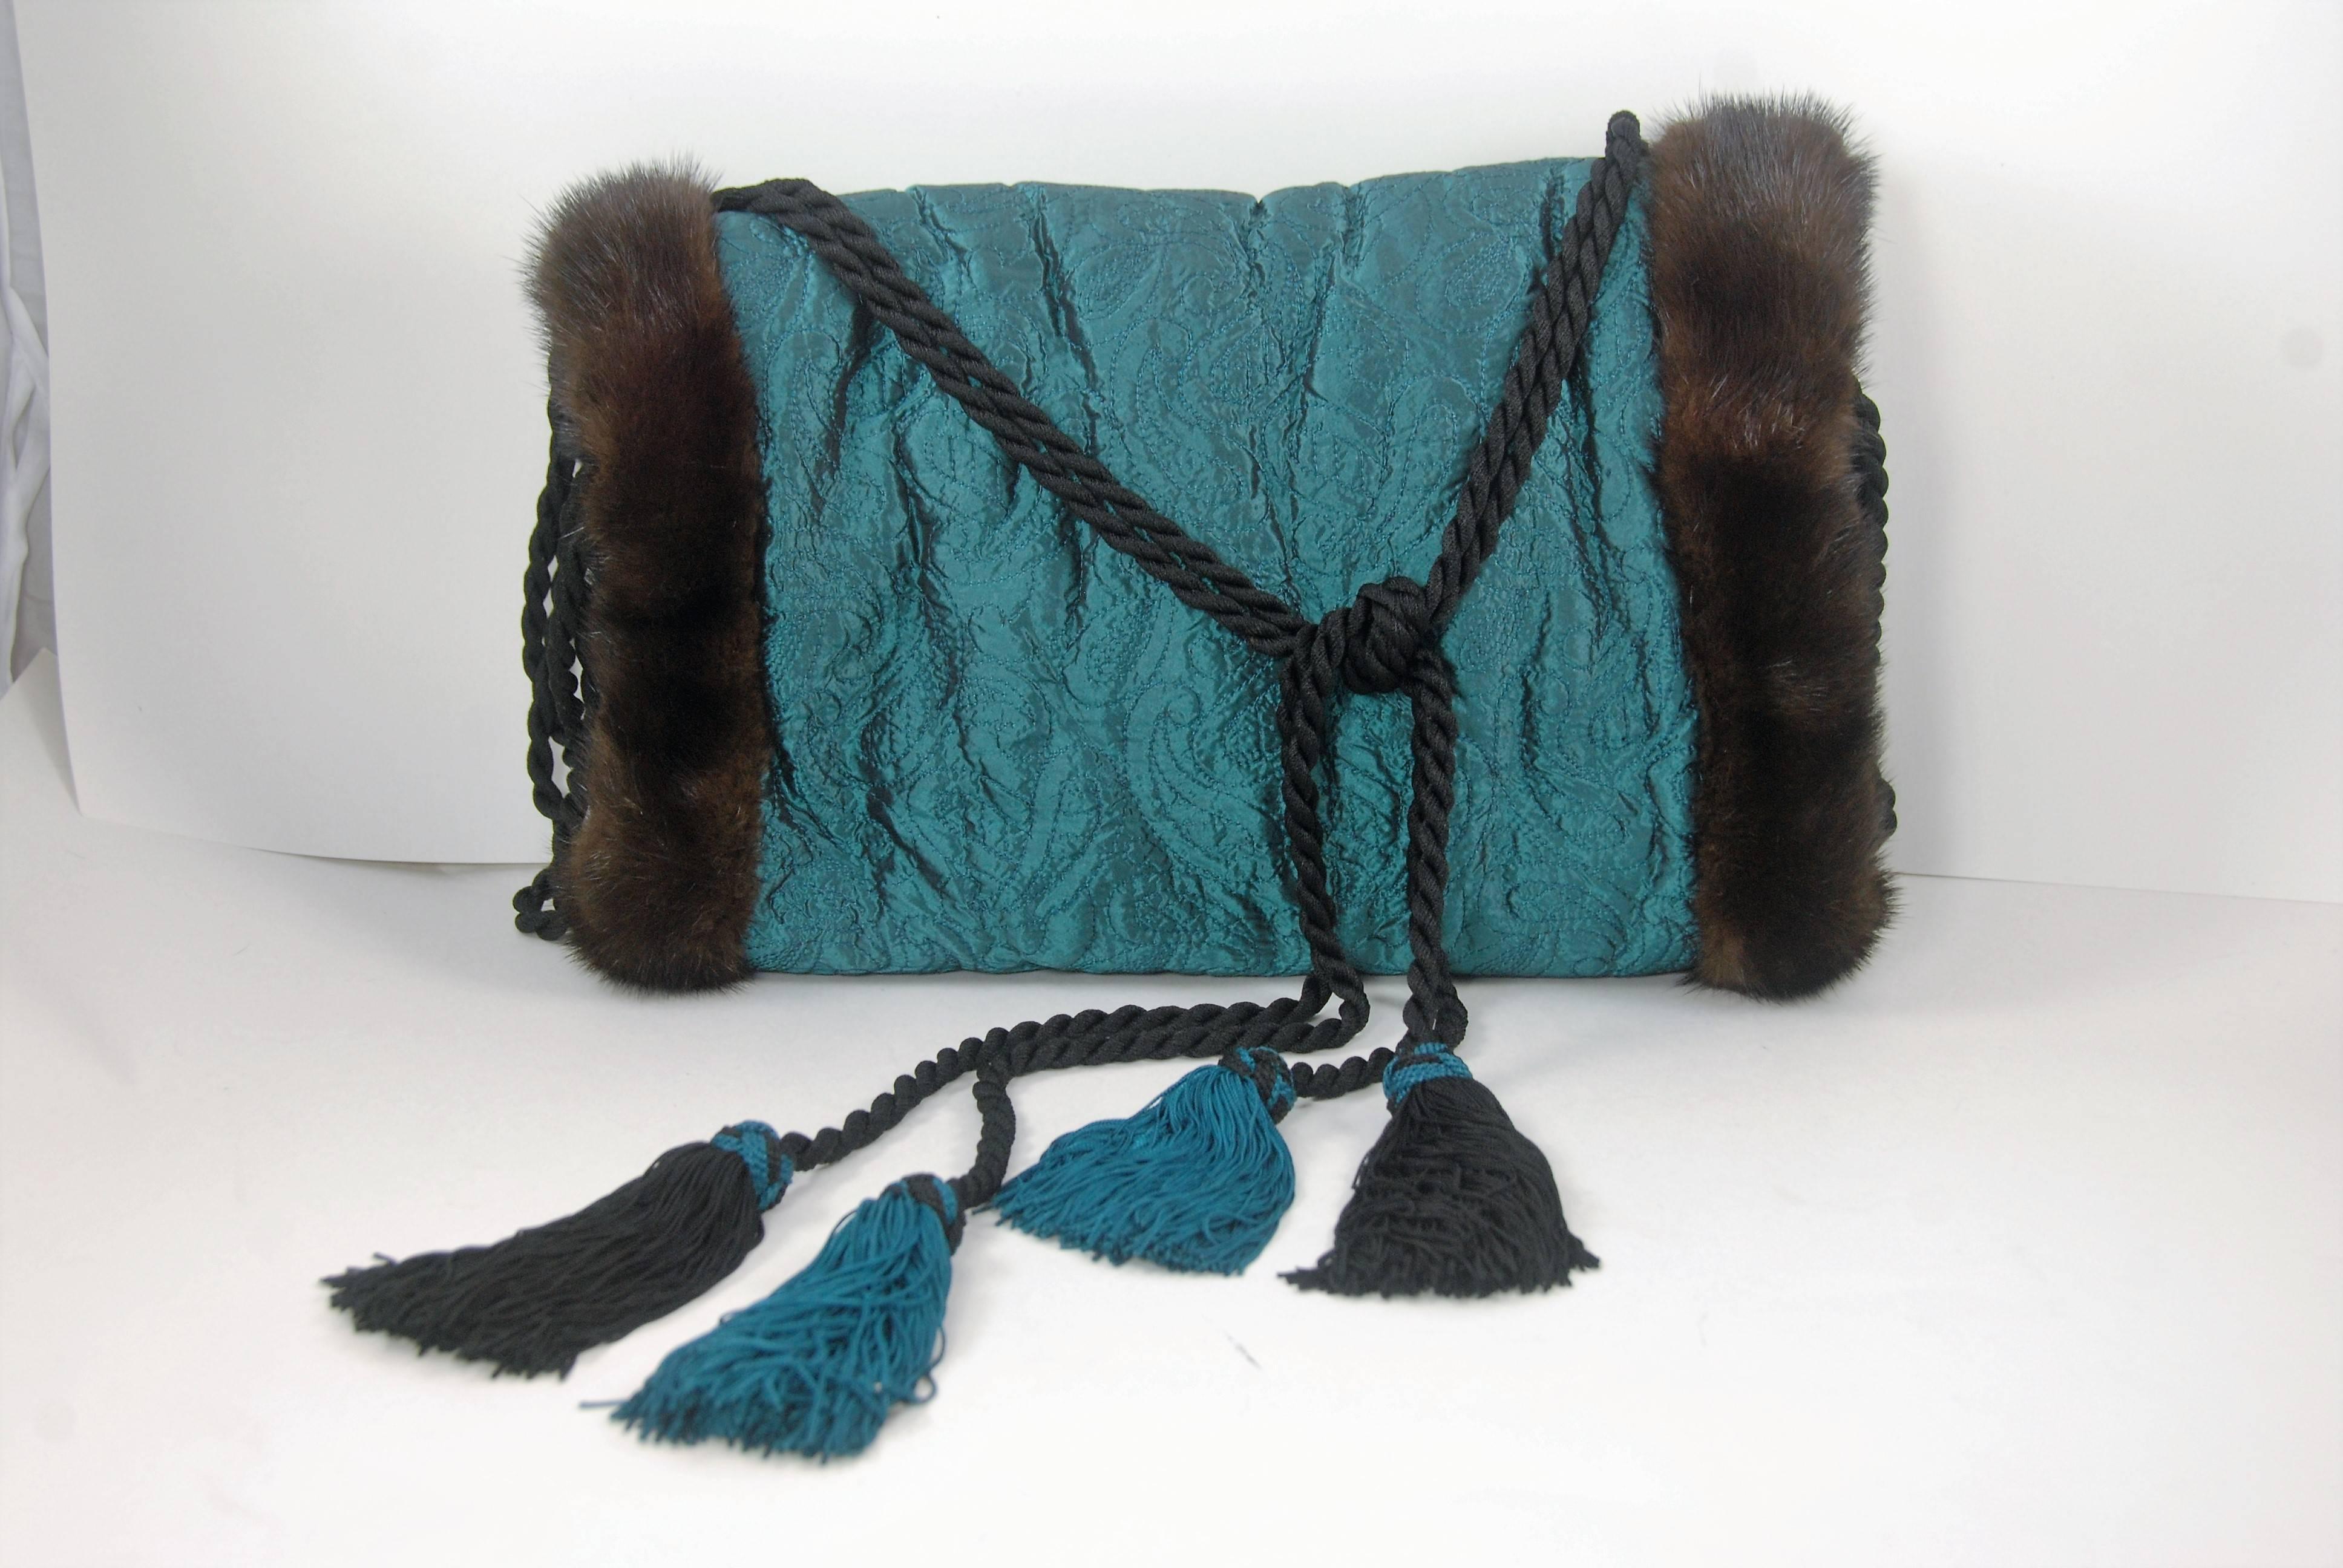 Isabel Canovas mink trimmed muff which is also fur lined. The lining is either sheared mink or another fur, I am not sure which it is. The outside of the muff is silk satin quilted fabric in blue with black undertones. The quilting is done is a